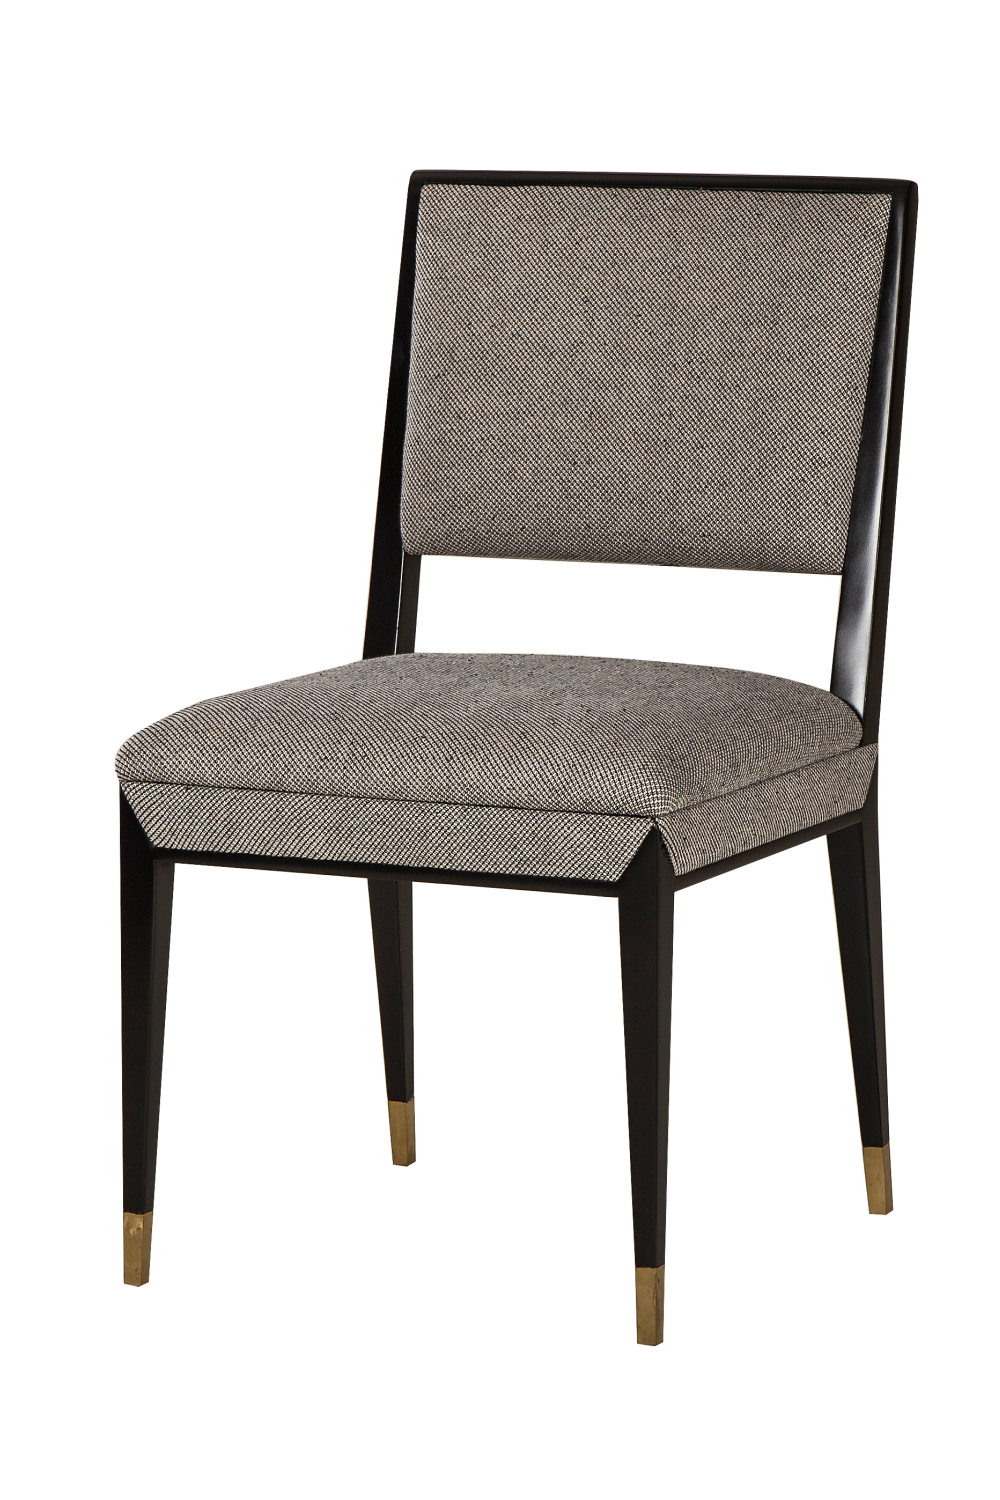 Brass Accent Black Upholstery Side Chair | Andrew Martin Reform | OROA